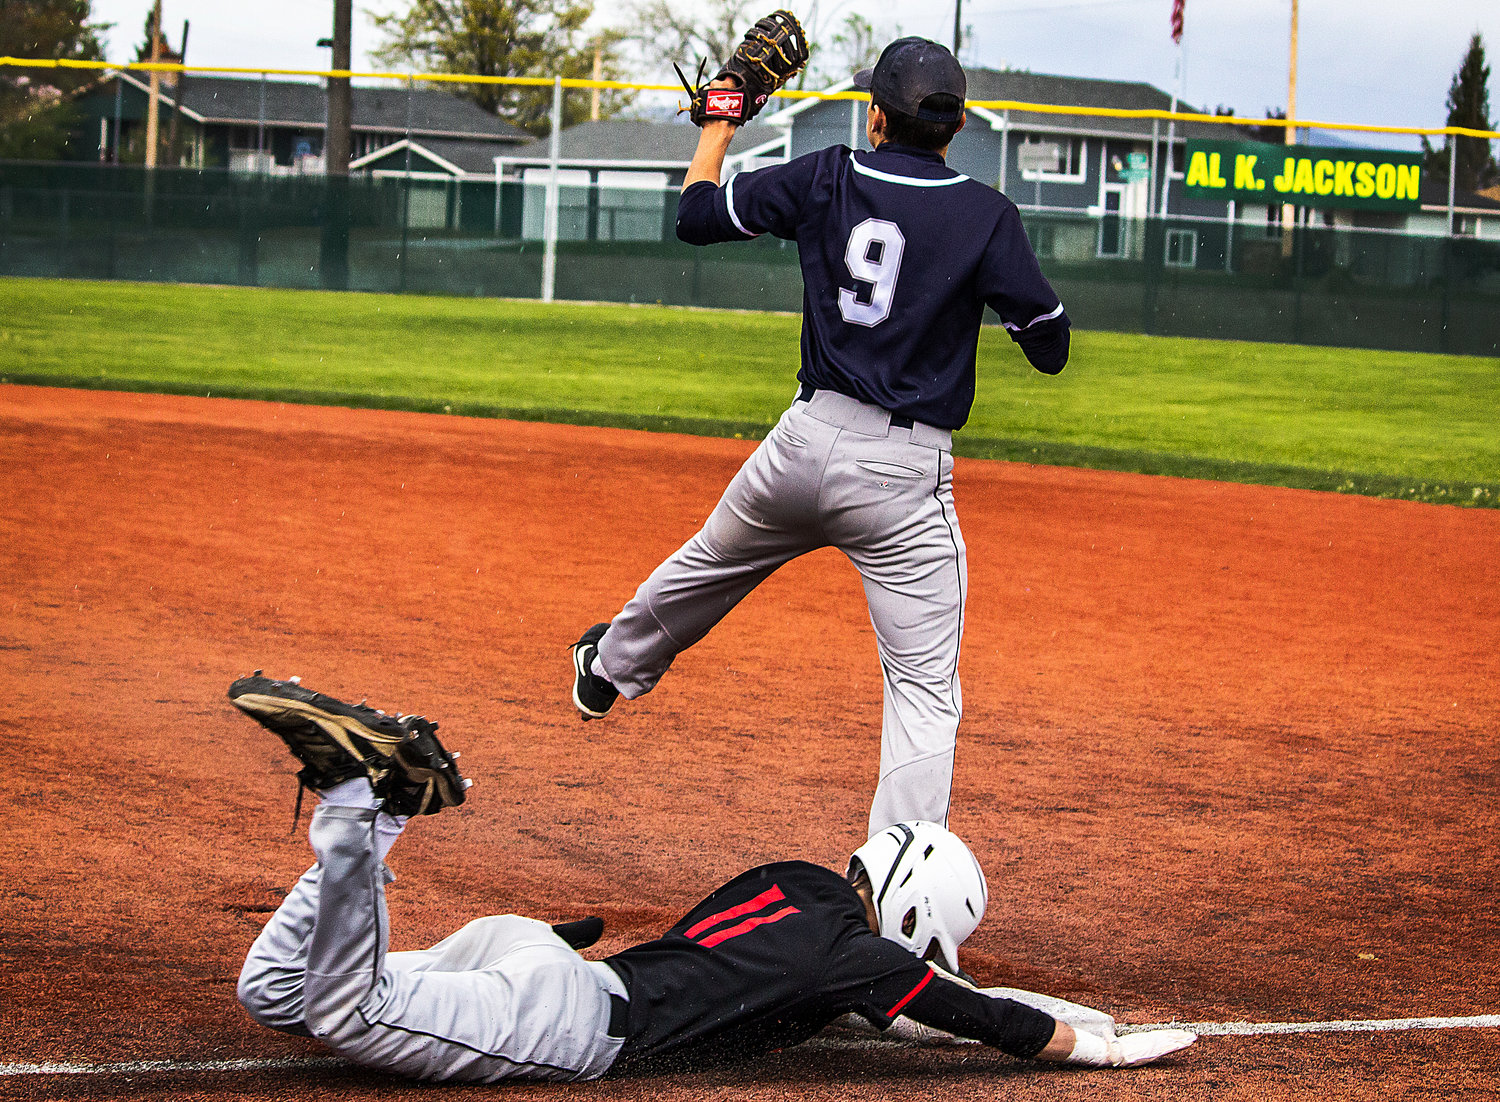 Toledo's Carson Gould slides into first base during WIAA State 2B Baseball action on Saturday, May 21, at Shadle Park High School in Spokane. Chewelah's Dekota Acosta was receiving the throw to first base.